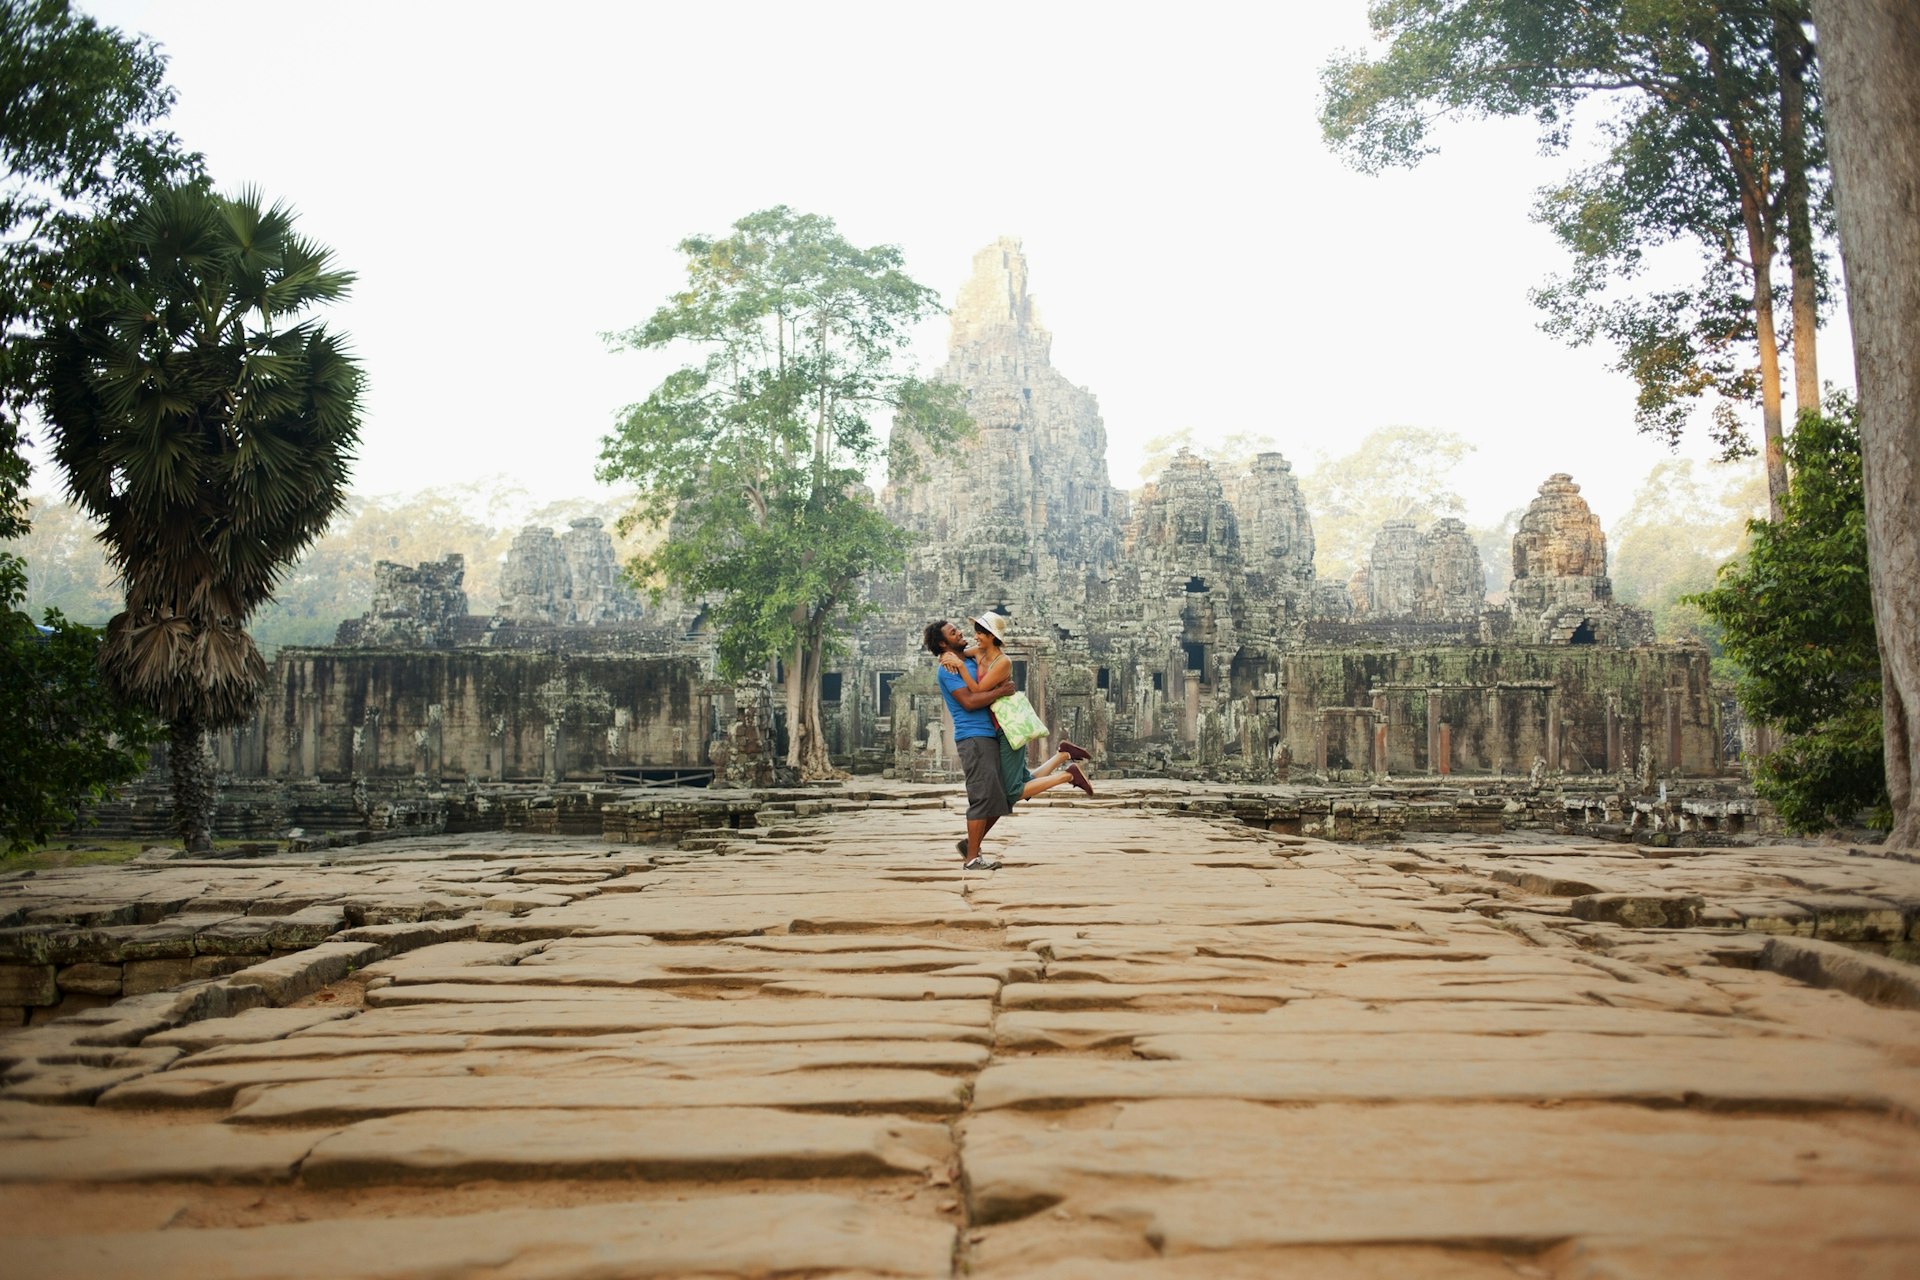 A man lifts a woman into an embrace in front of the vast ancient jungle temple of Angkor in Cambodia